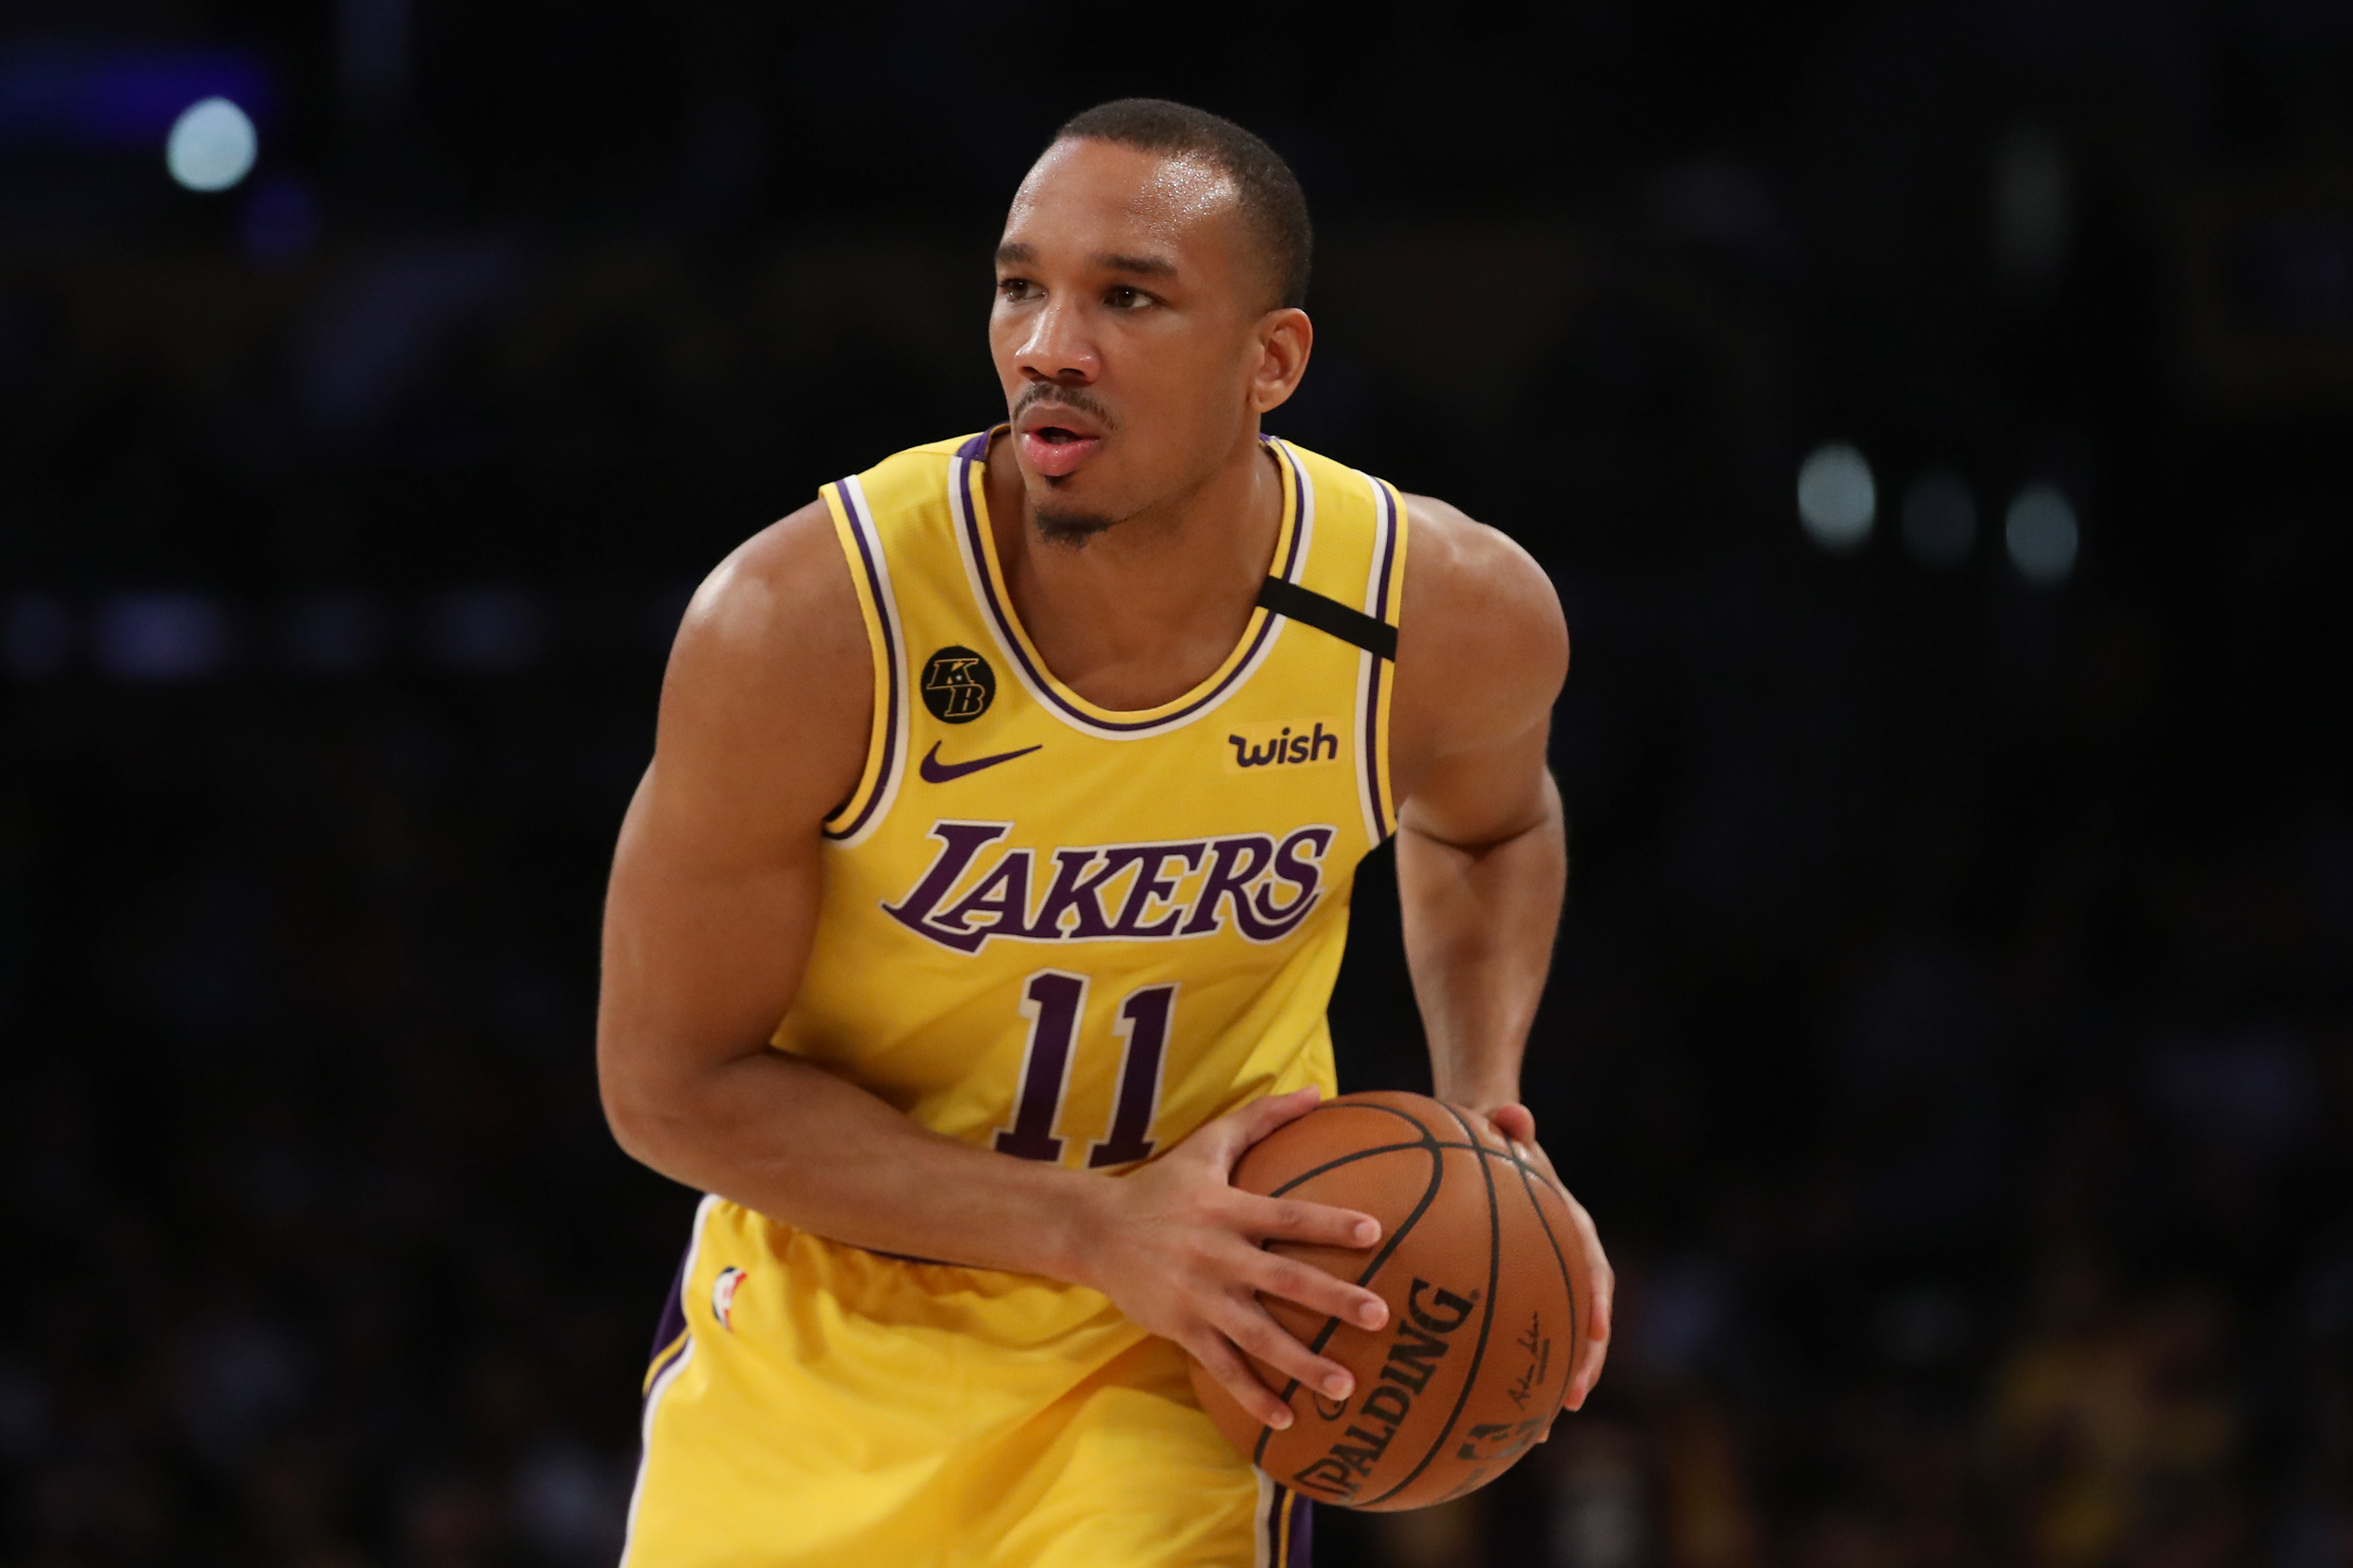 The Lakers' Avery Bradley